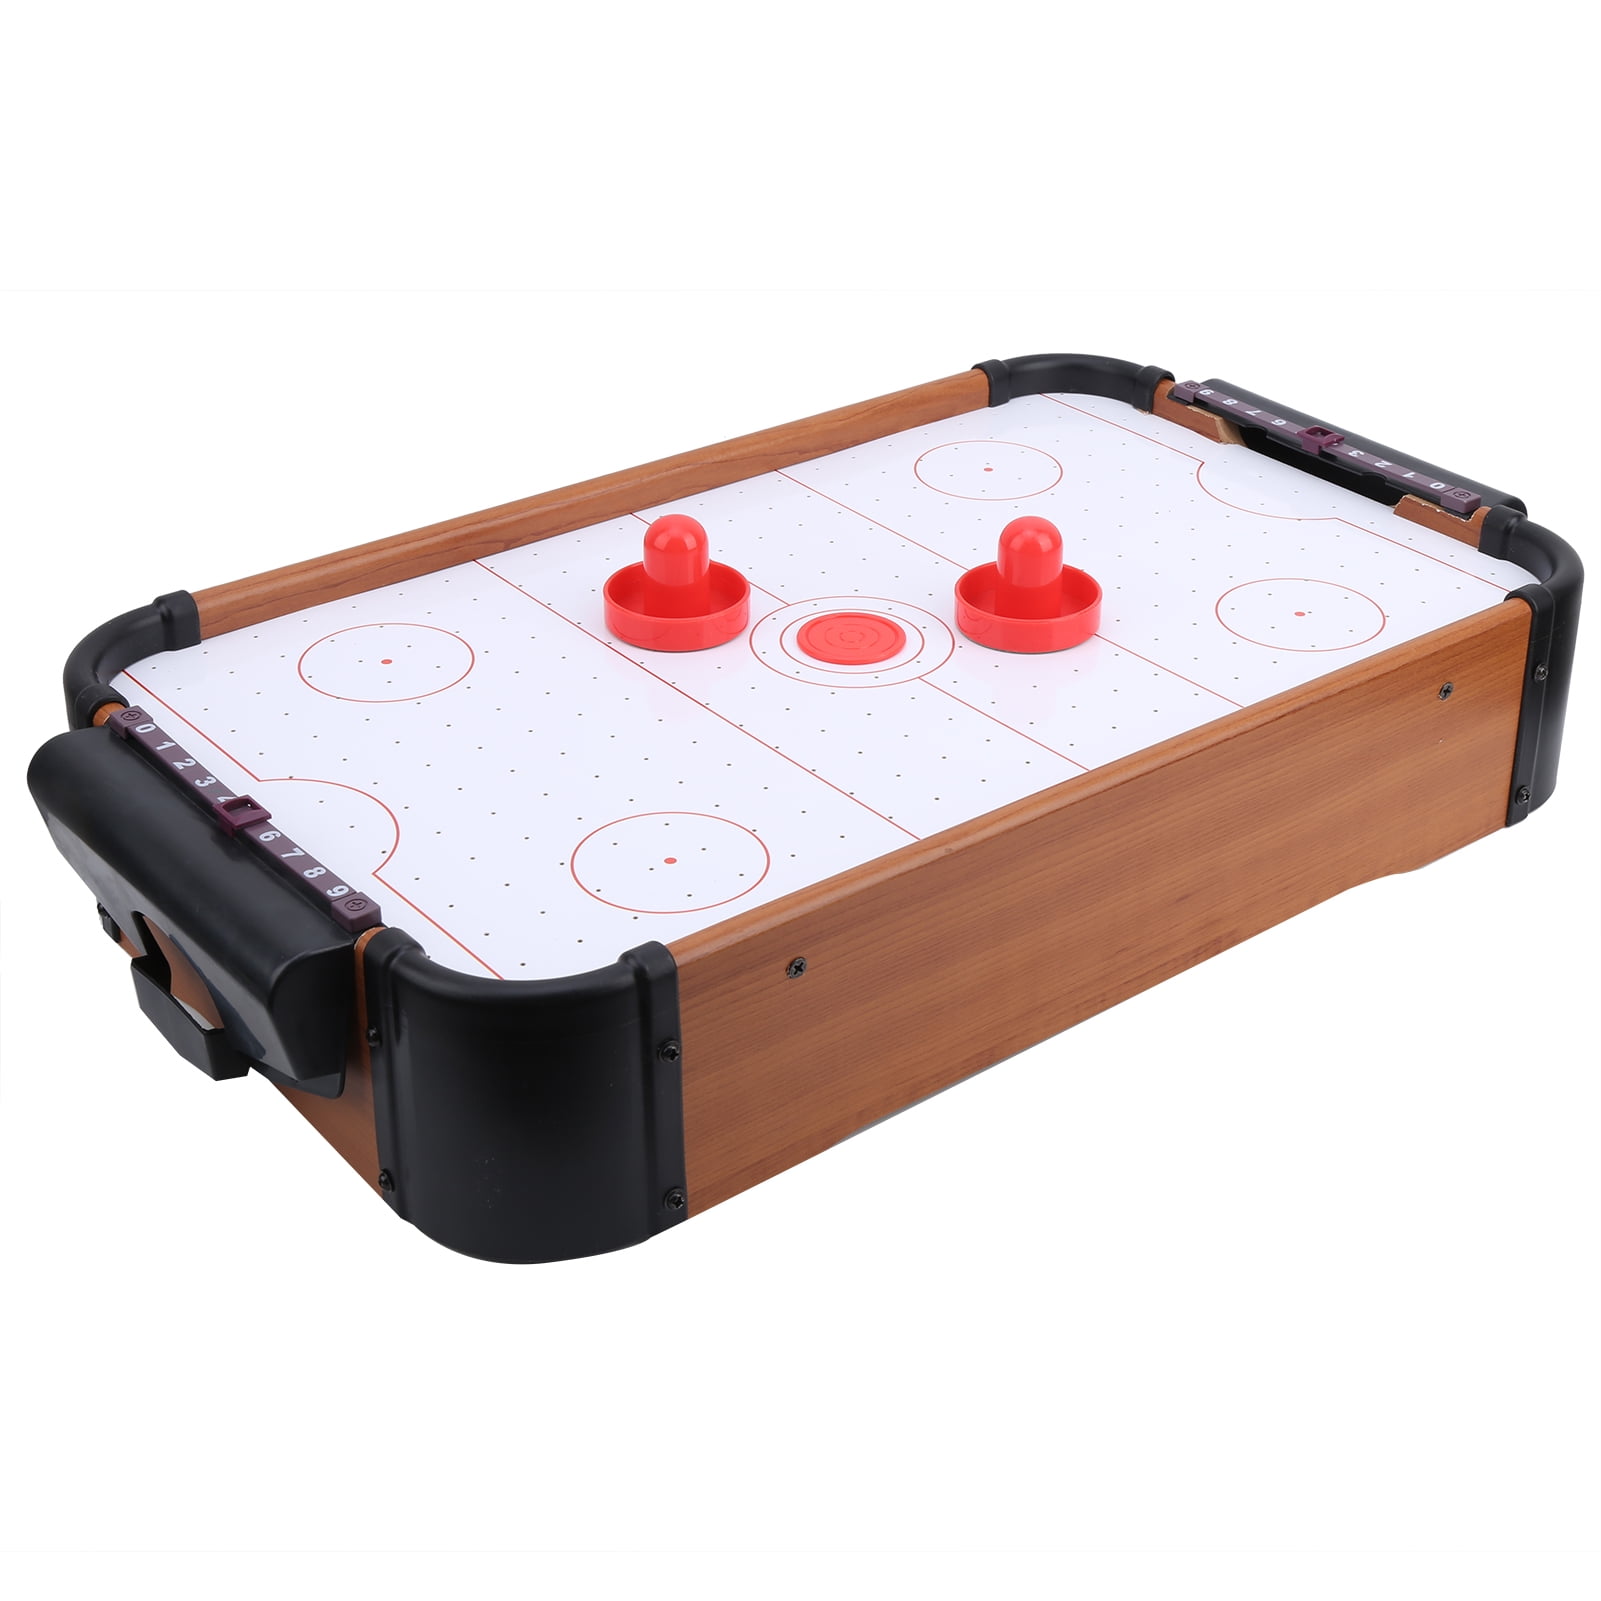 Cergrey Table Air Hockey Game Desktop Parent‑Child Interactive Portable Board Game Toys Gift,Desktop Air Hockey,Air Hockey Game Toy